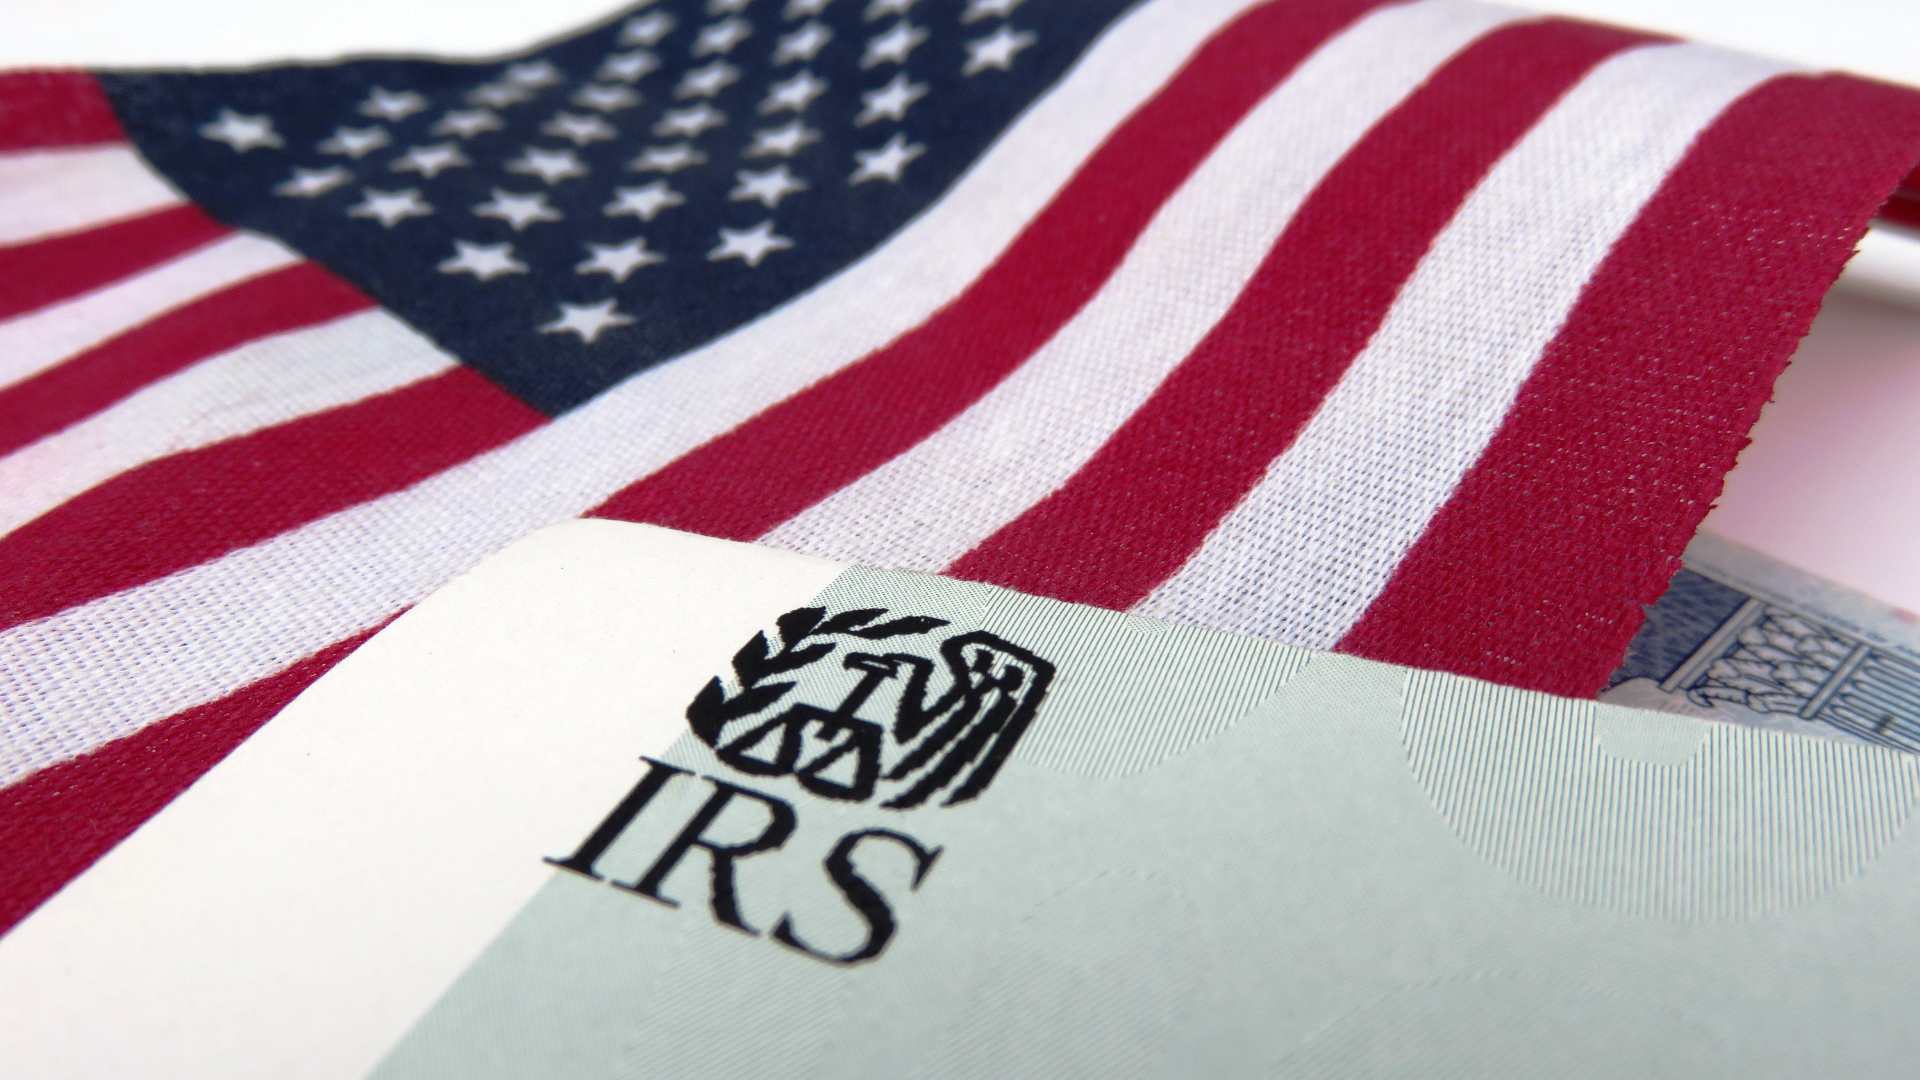 American flag and IRS